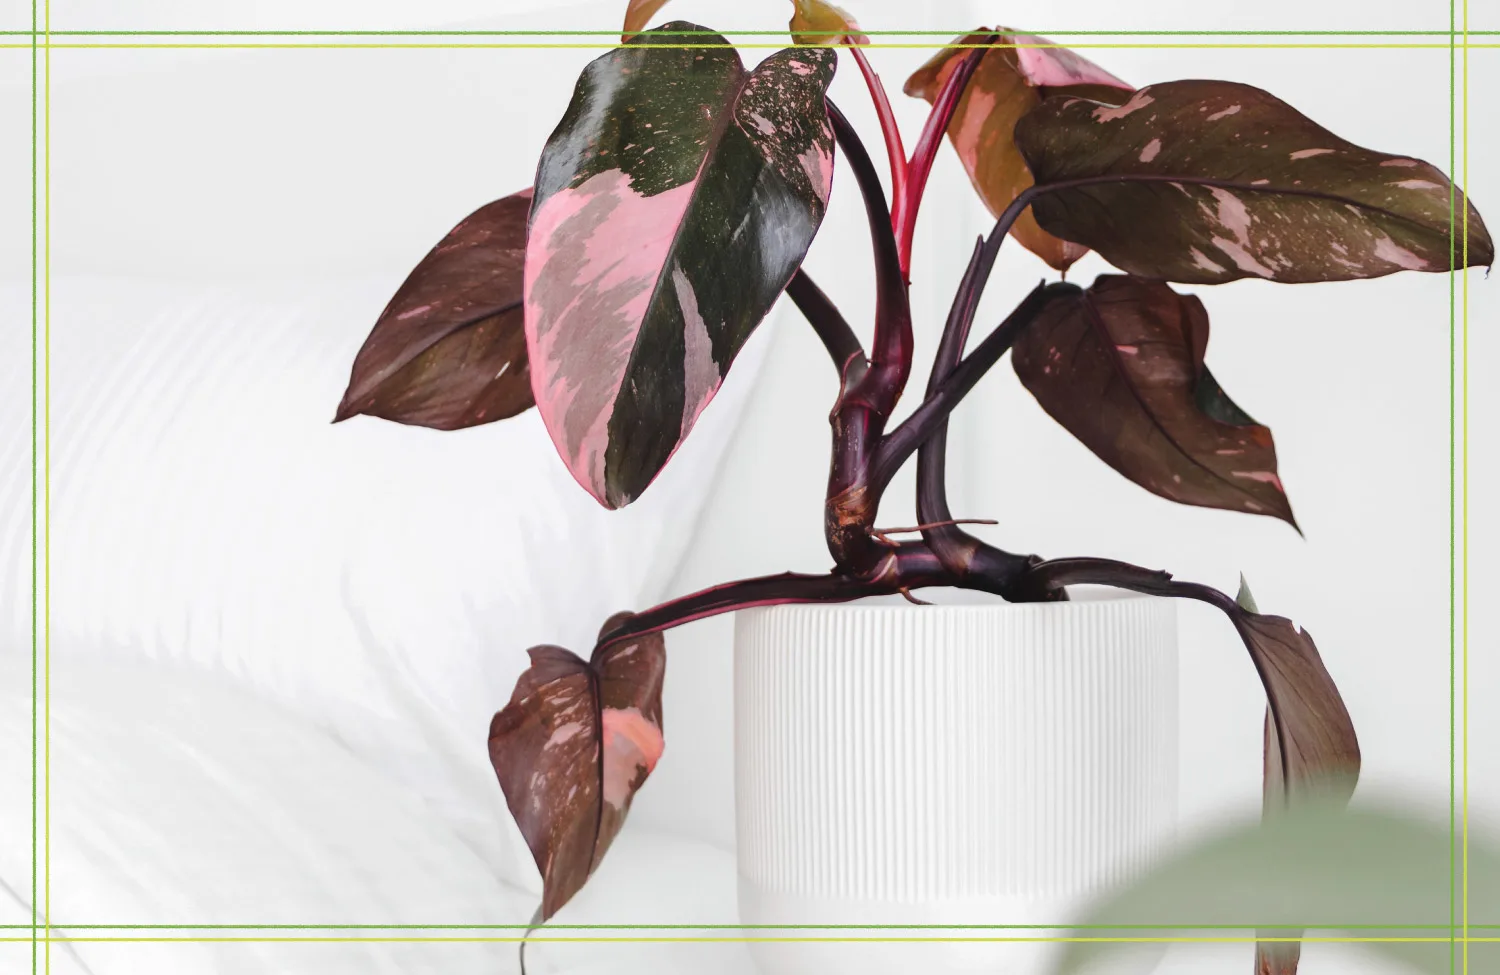 Pothos vs Philodendron: How to Spot the Difference